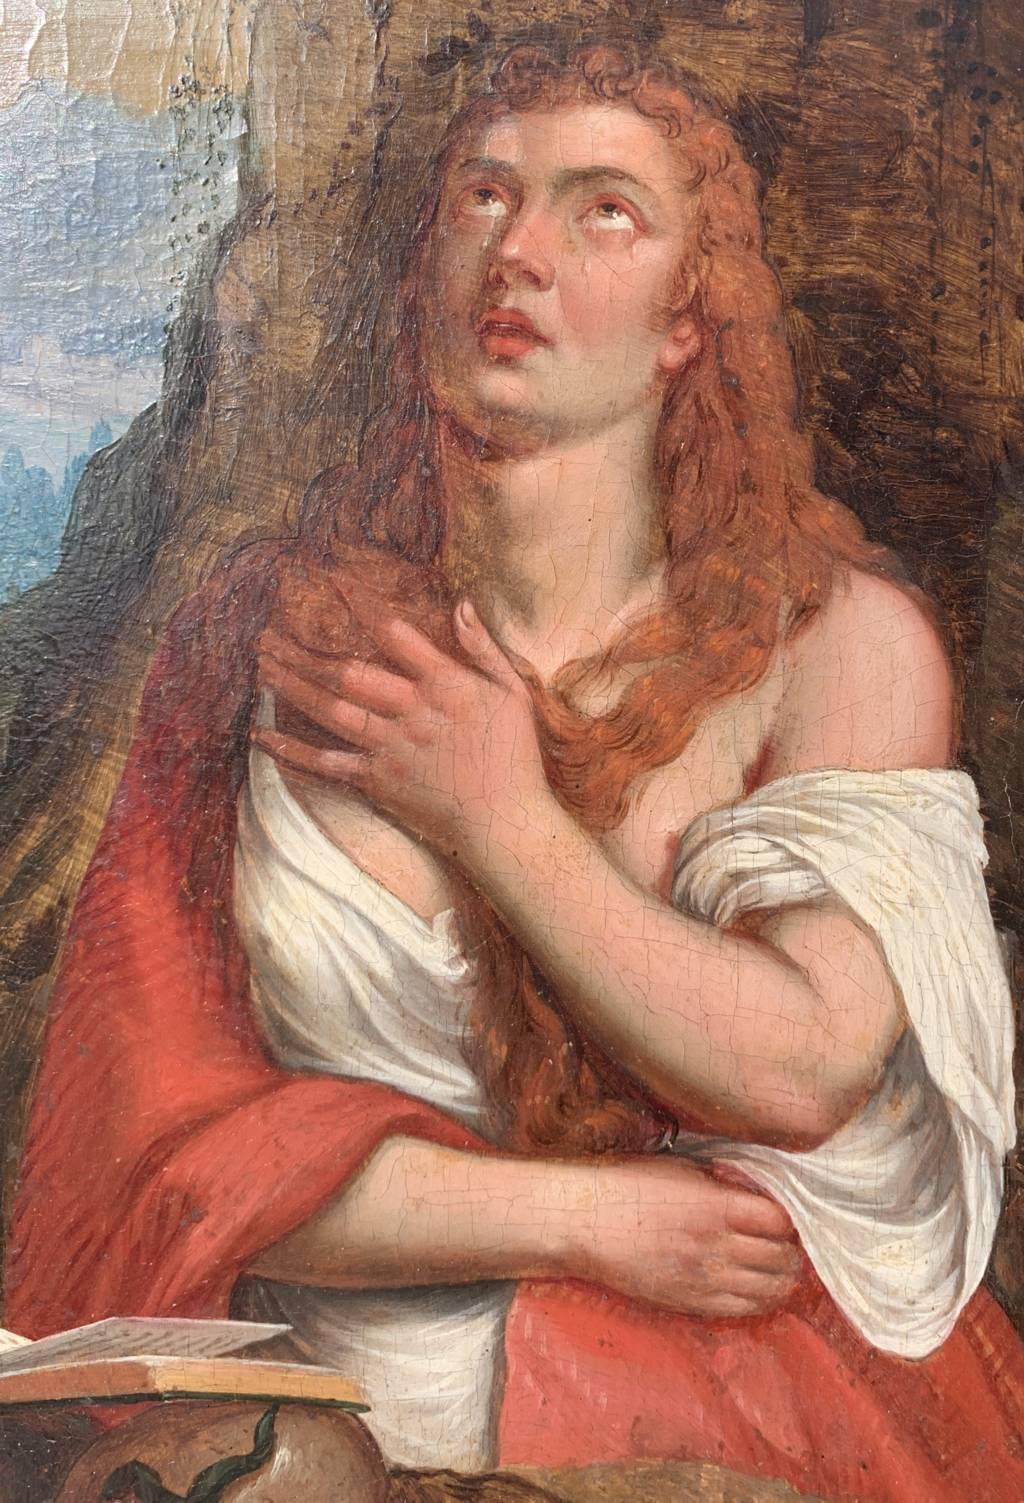 Titian workshop(Venetian school) - 17th century figure painting - Mary Magdalene For Sale 2